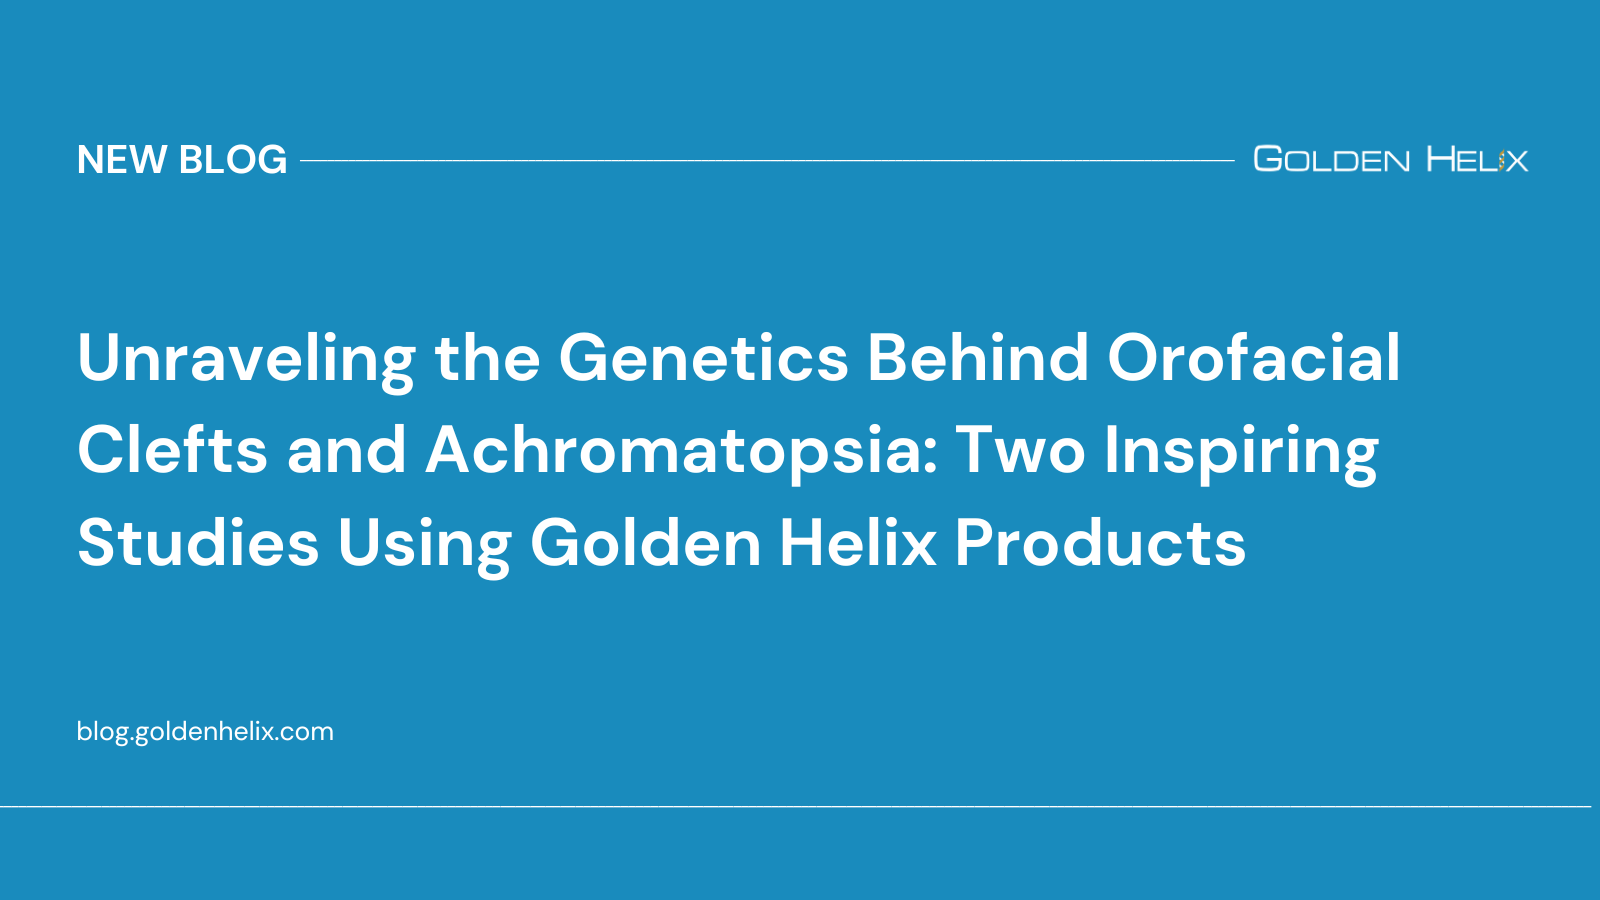 Unraveling the Genetics Behind Orofacial Clefts and Achromatopsia Two Inspiring Studies Using Golden Helix Products